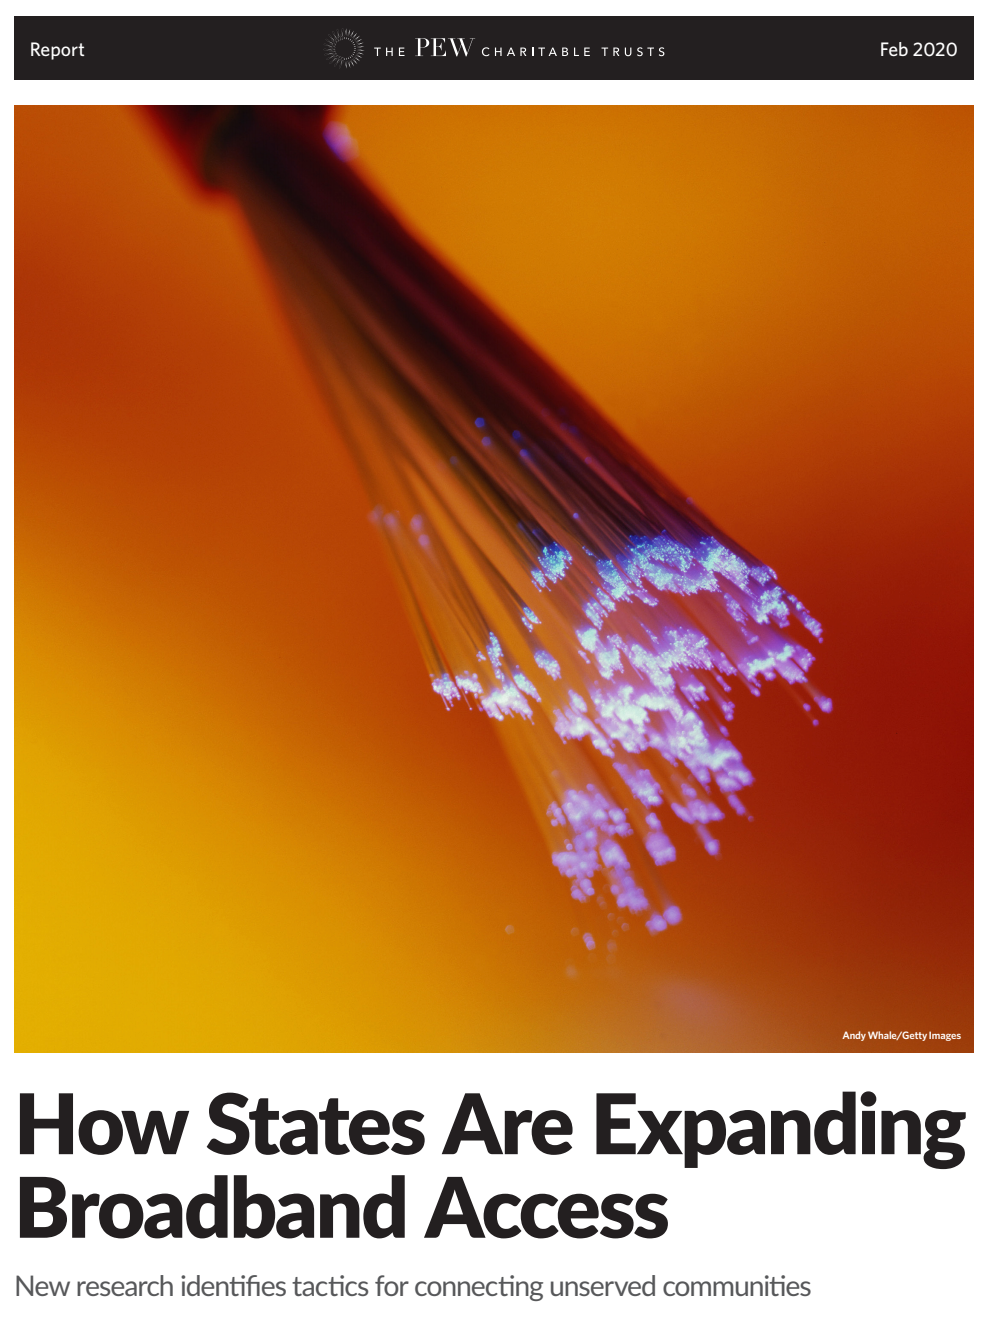 New “how States Are Expanding Broadband Access” New Report From Pew